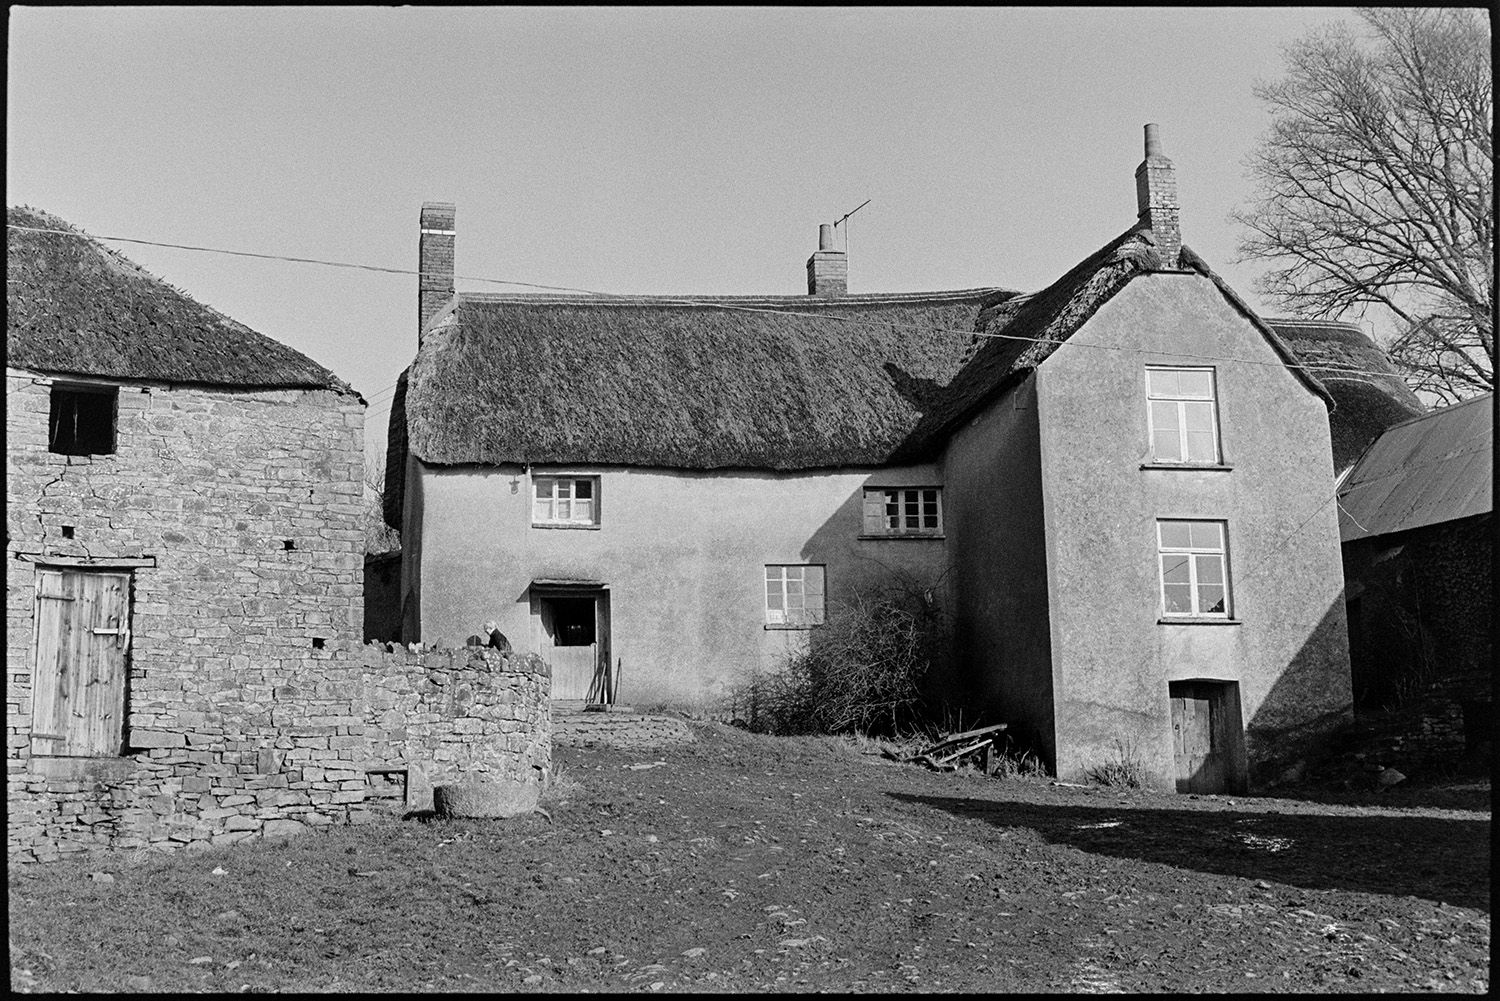 Cob and thatch farmhouse and barns, some collapsing. 
[A cob and thatch farmhouse next to a stone and thatch barn at Bridgetown, Iddesleigh. The barn has a tallet and wooden door.]